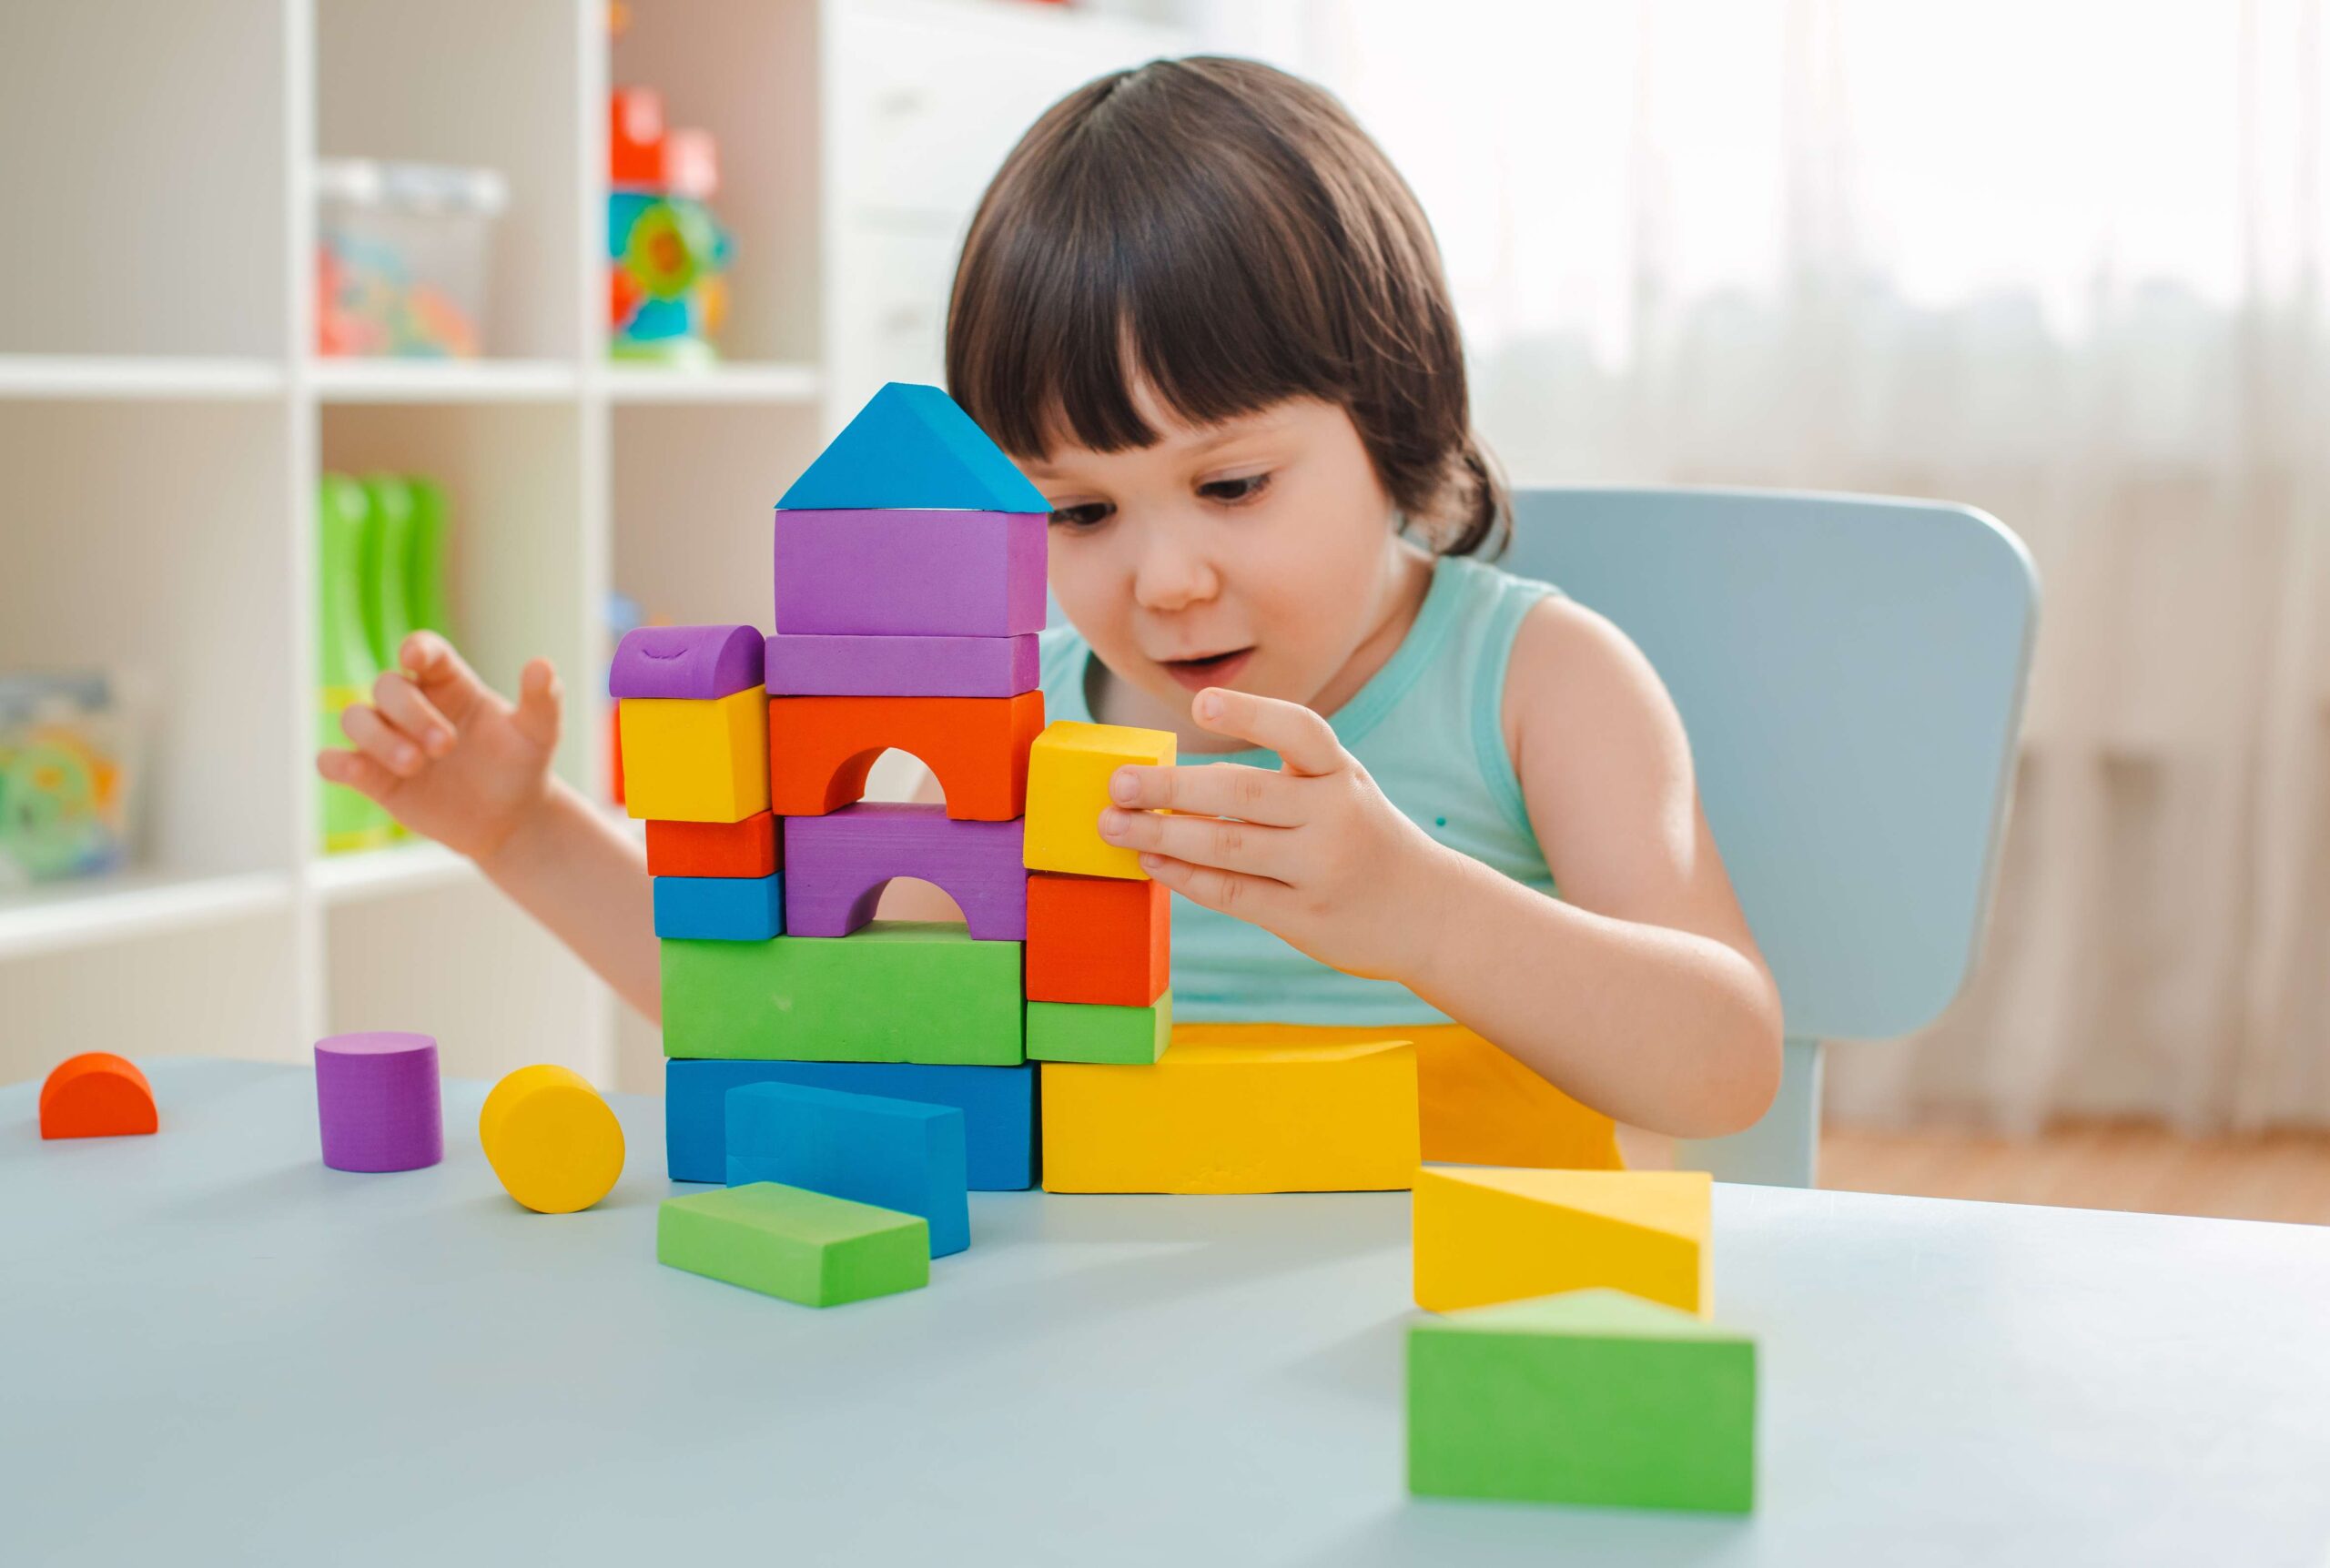 little-girl-collects-wooden-unpainted-pyramid-safe-natural-wooden-children-s-toys (1)